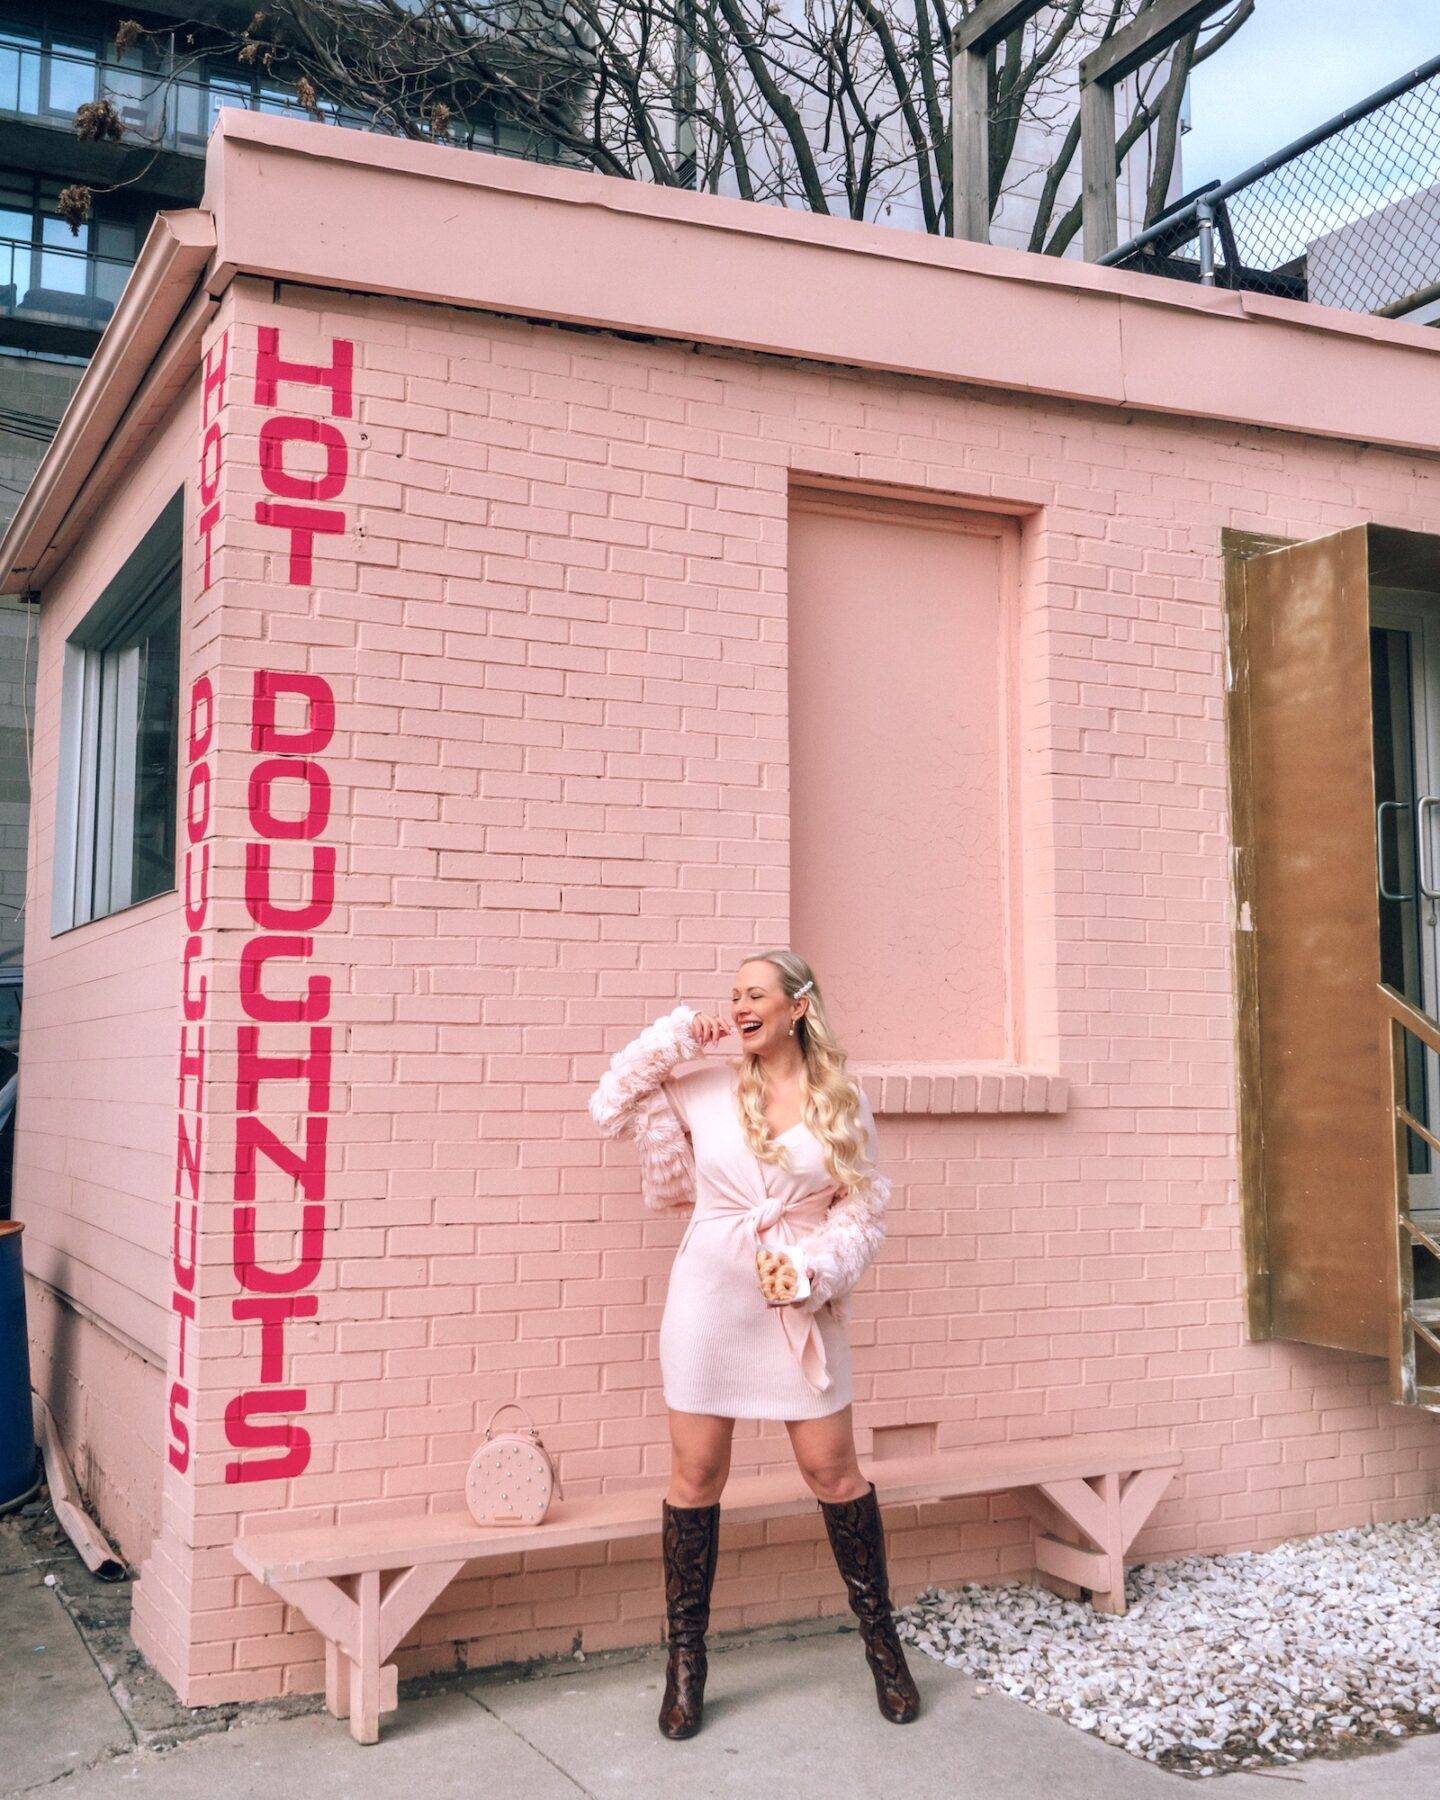 On the hunt for the best and most instagram-worthy pink places in Toronto? Look no further. As a native to Toronto and a certified pink lover myself I've put together this list of all the places you won't want to miss. This post has all the hottest pink spots in Toronto from restaurants, to pink walls, ice cream parlours and more. If you're a lover of pink you won't want to miss checking out this list of pink Toronto spots. Pictured here: COPS Toronto